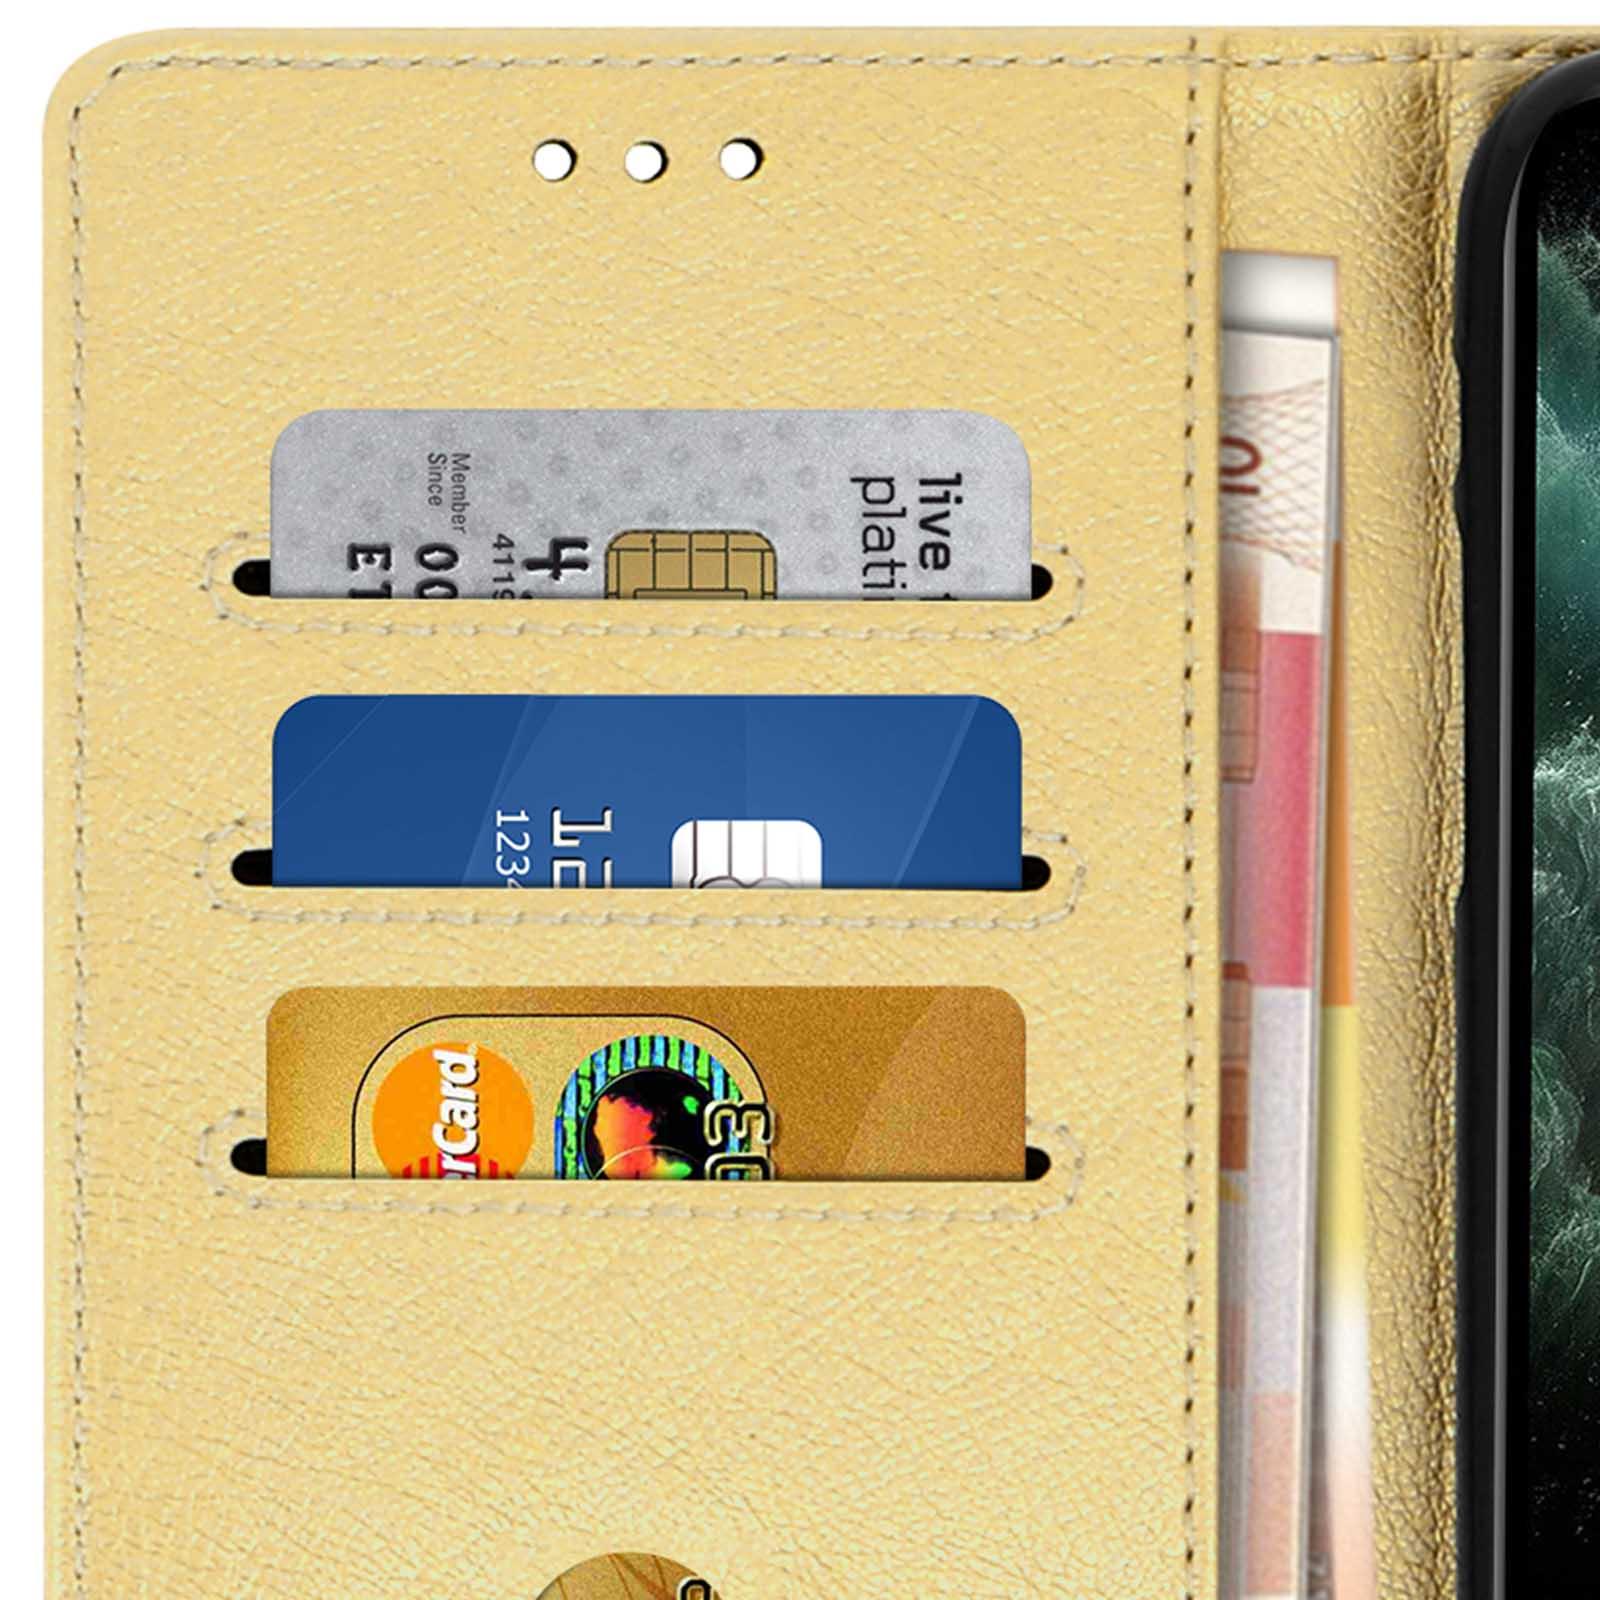 iPhone Bookcover, Pro, Apple, Series, Chester AVIZAR 11 Gold